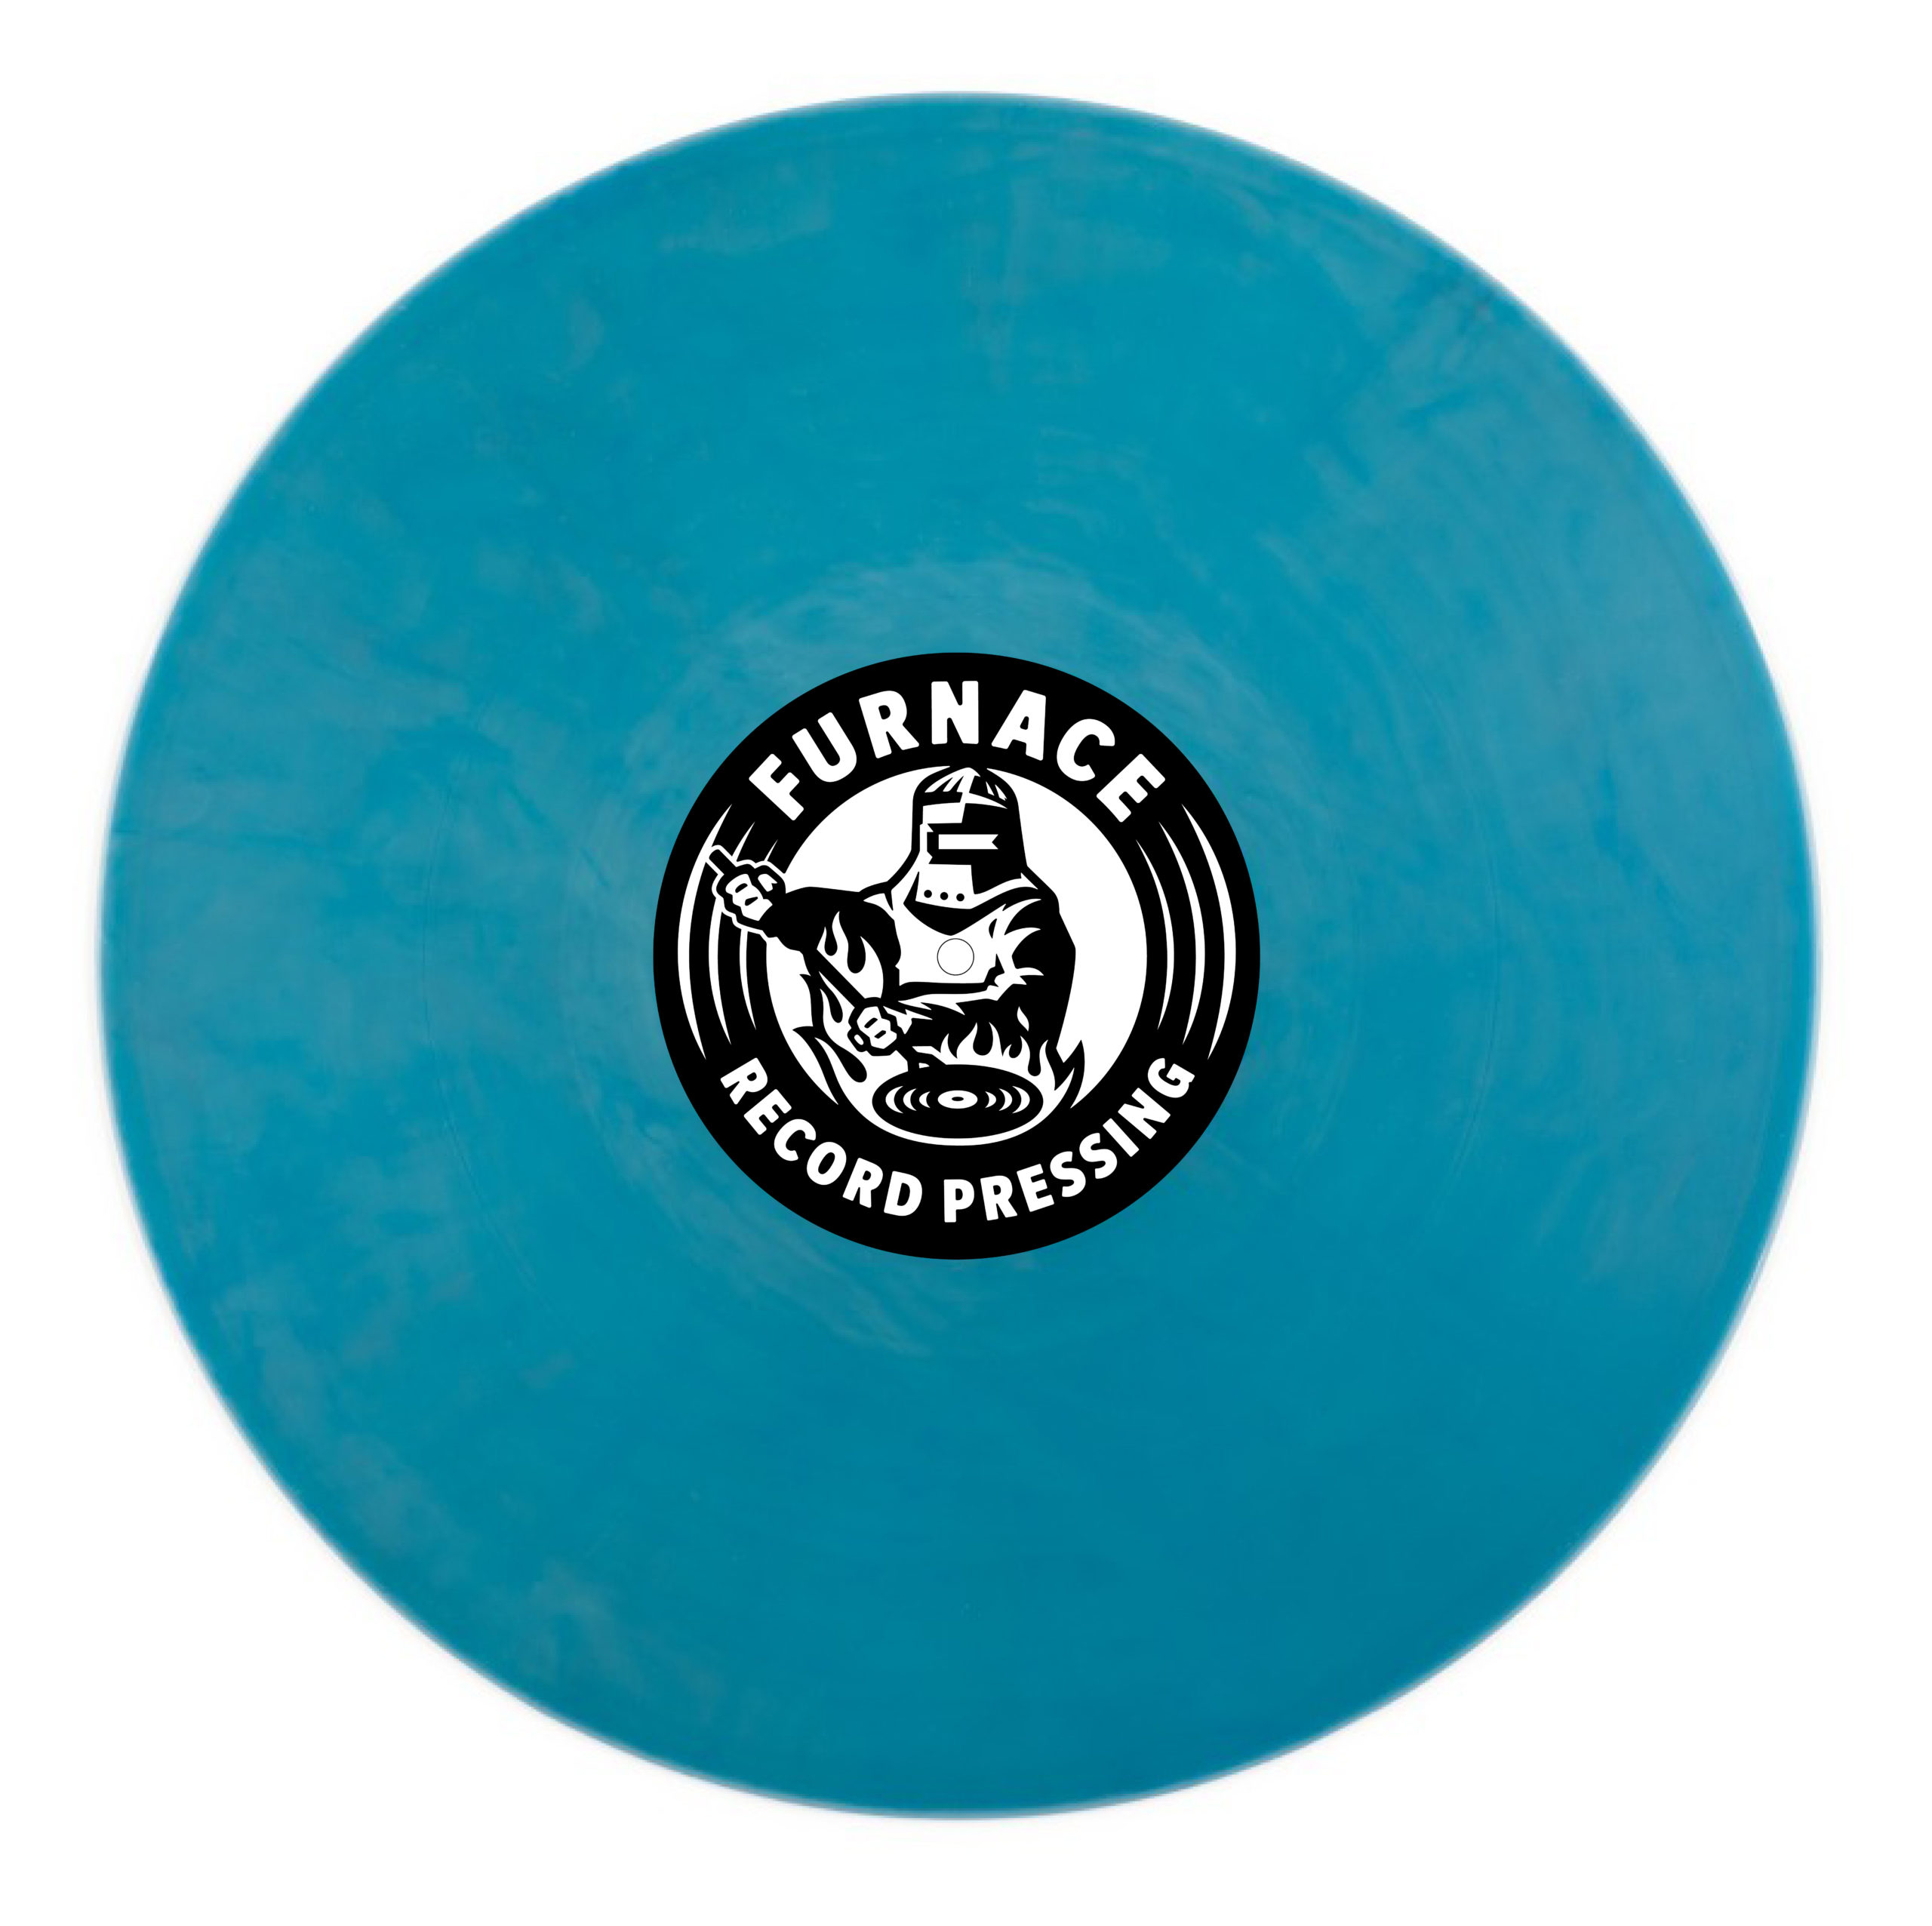 COLOR & SPECIAL EFFECT VINYL – Furnace Record Pressing